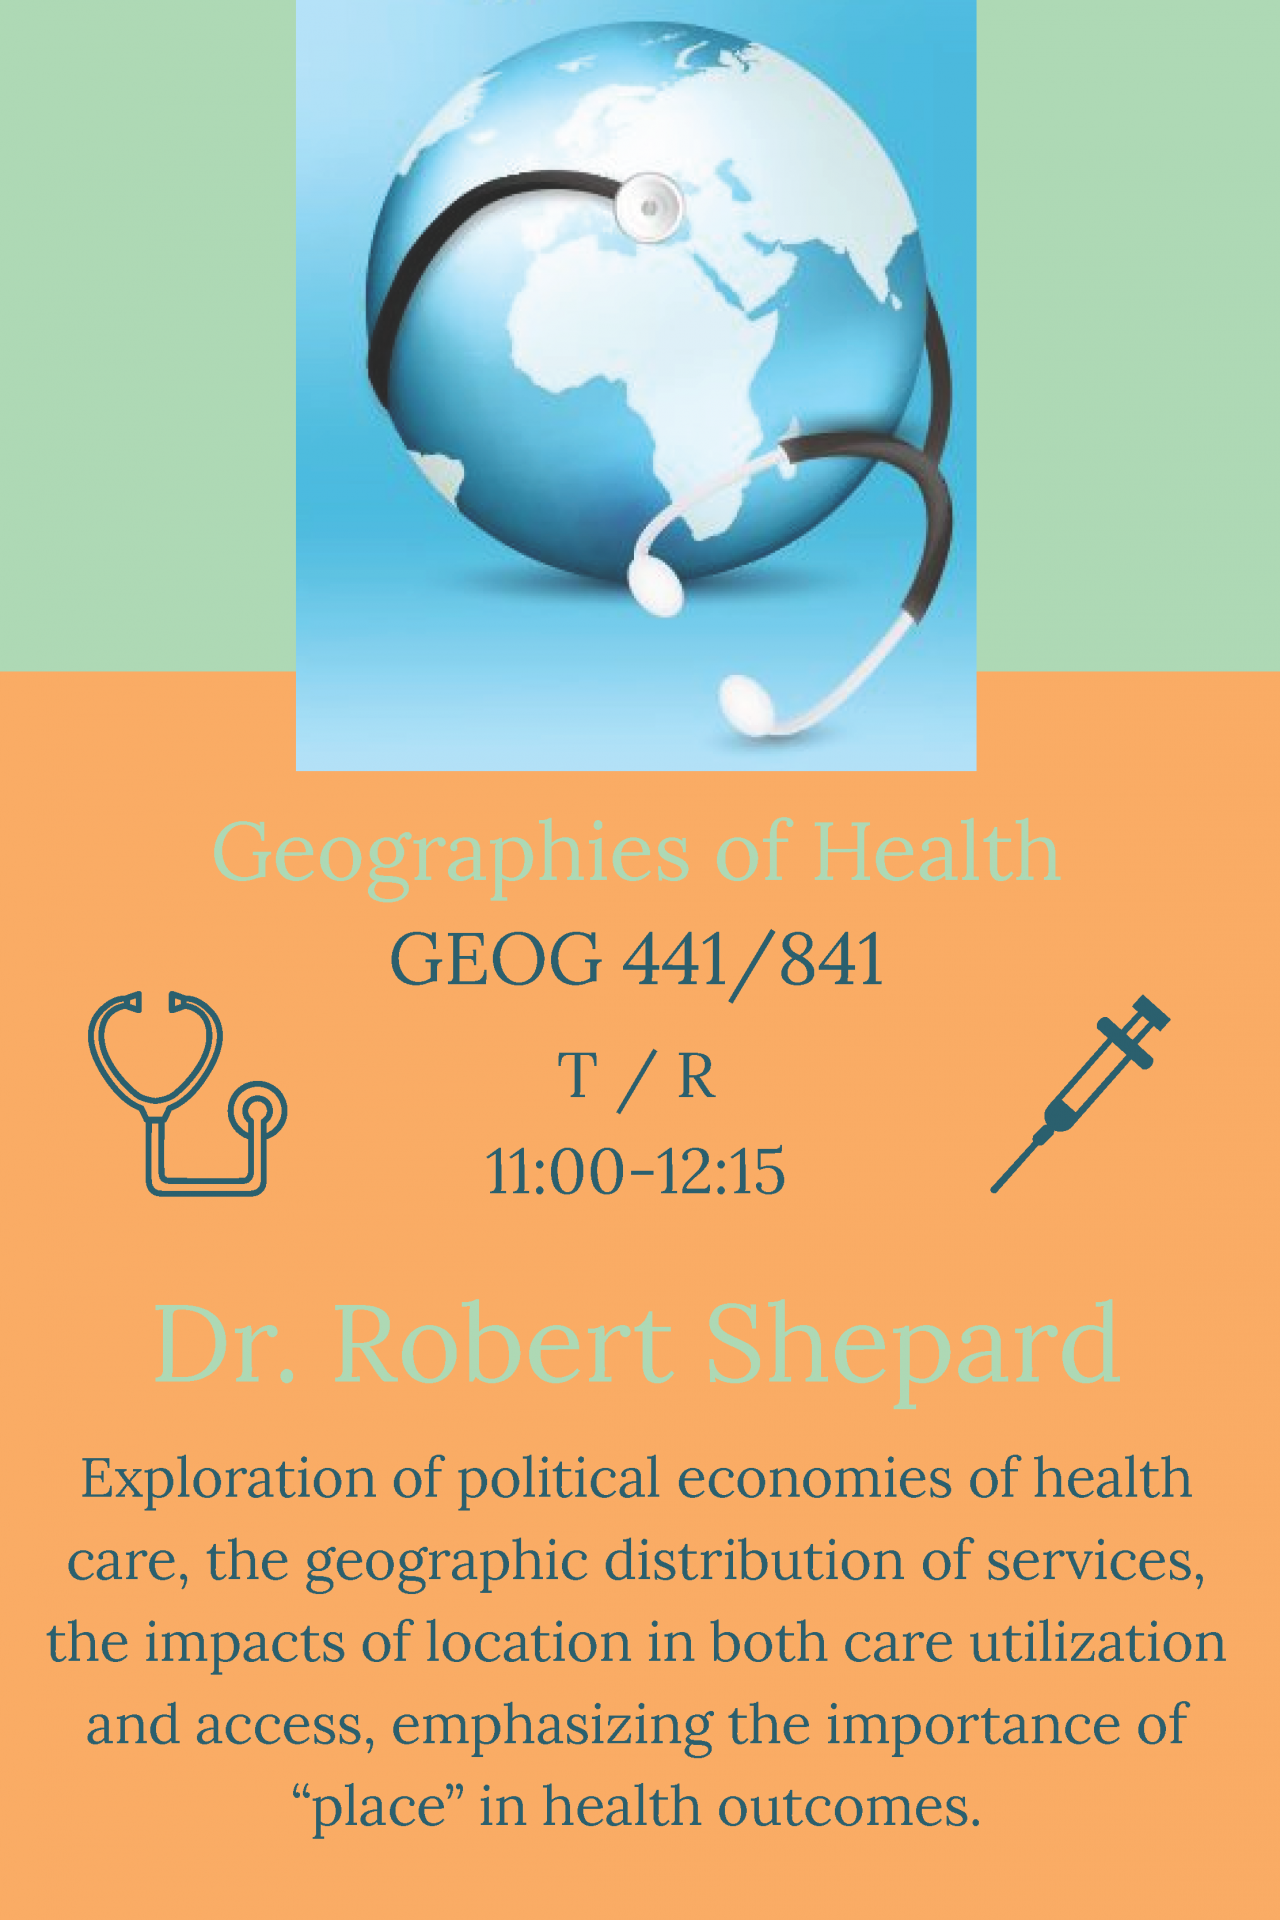 geography 441 flyer